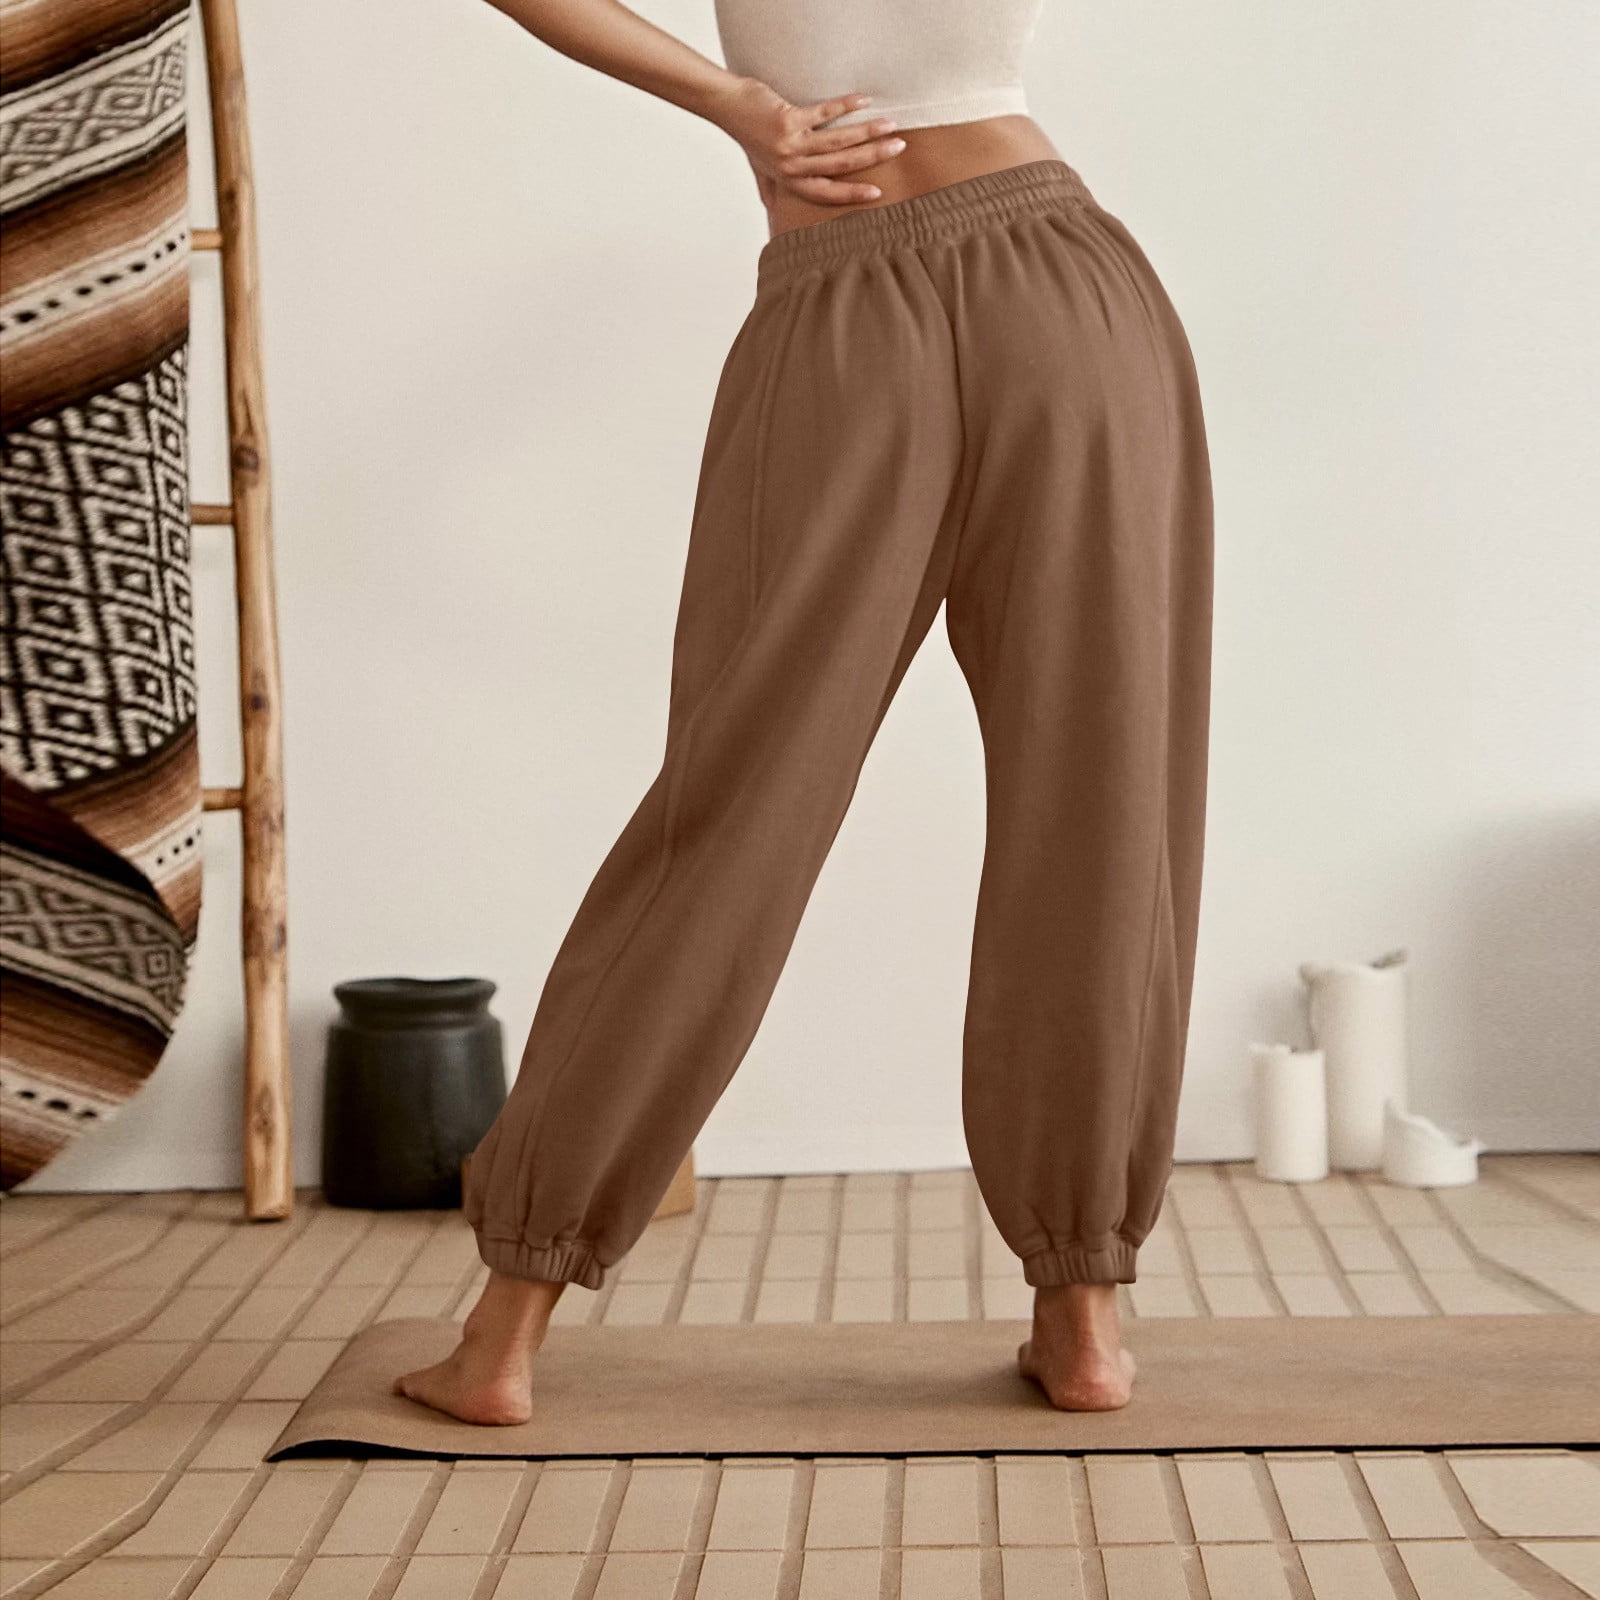 Susanny Sweatpants for Women with Pockets Petite Cinch Bottom